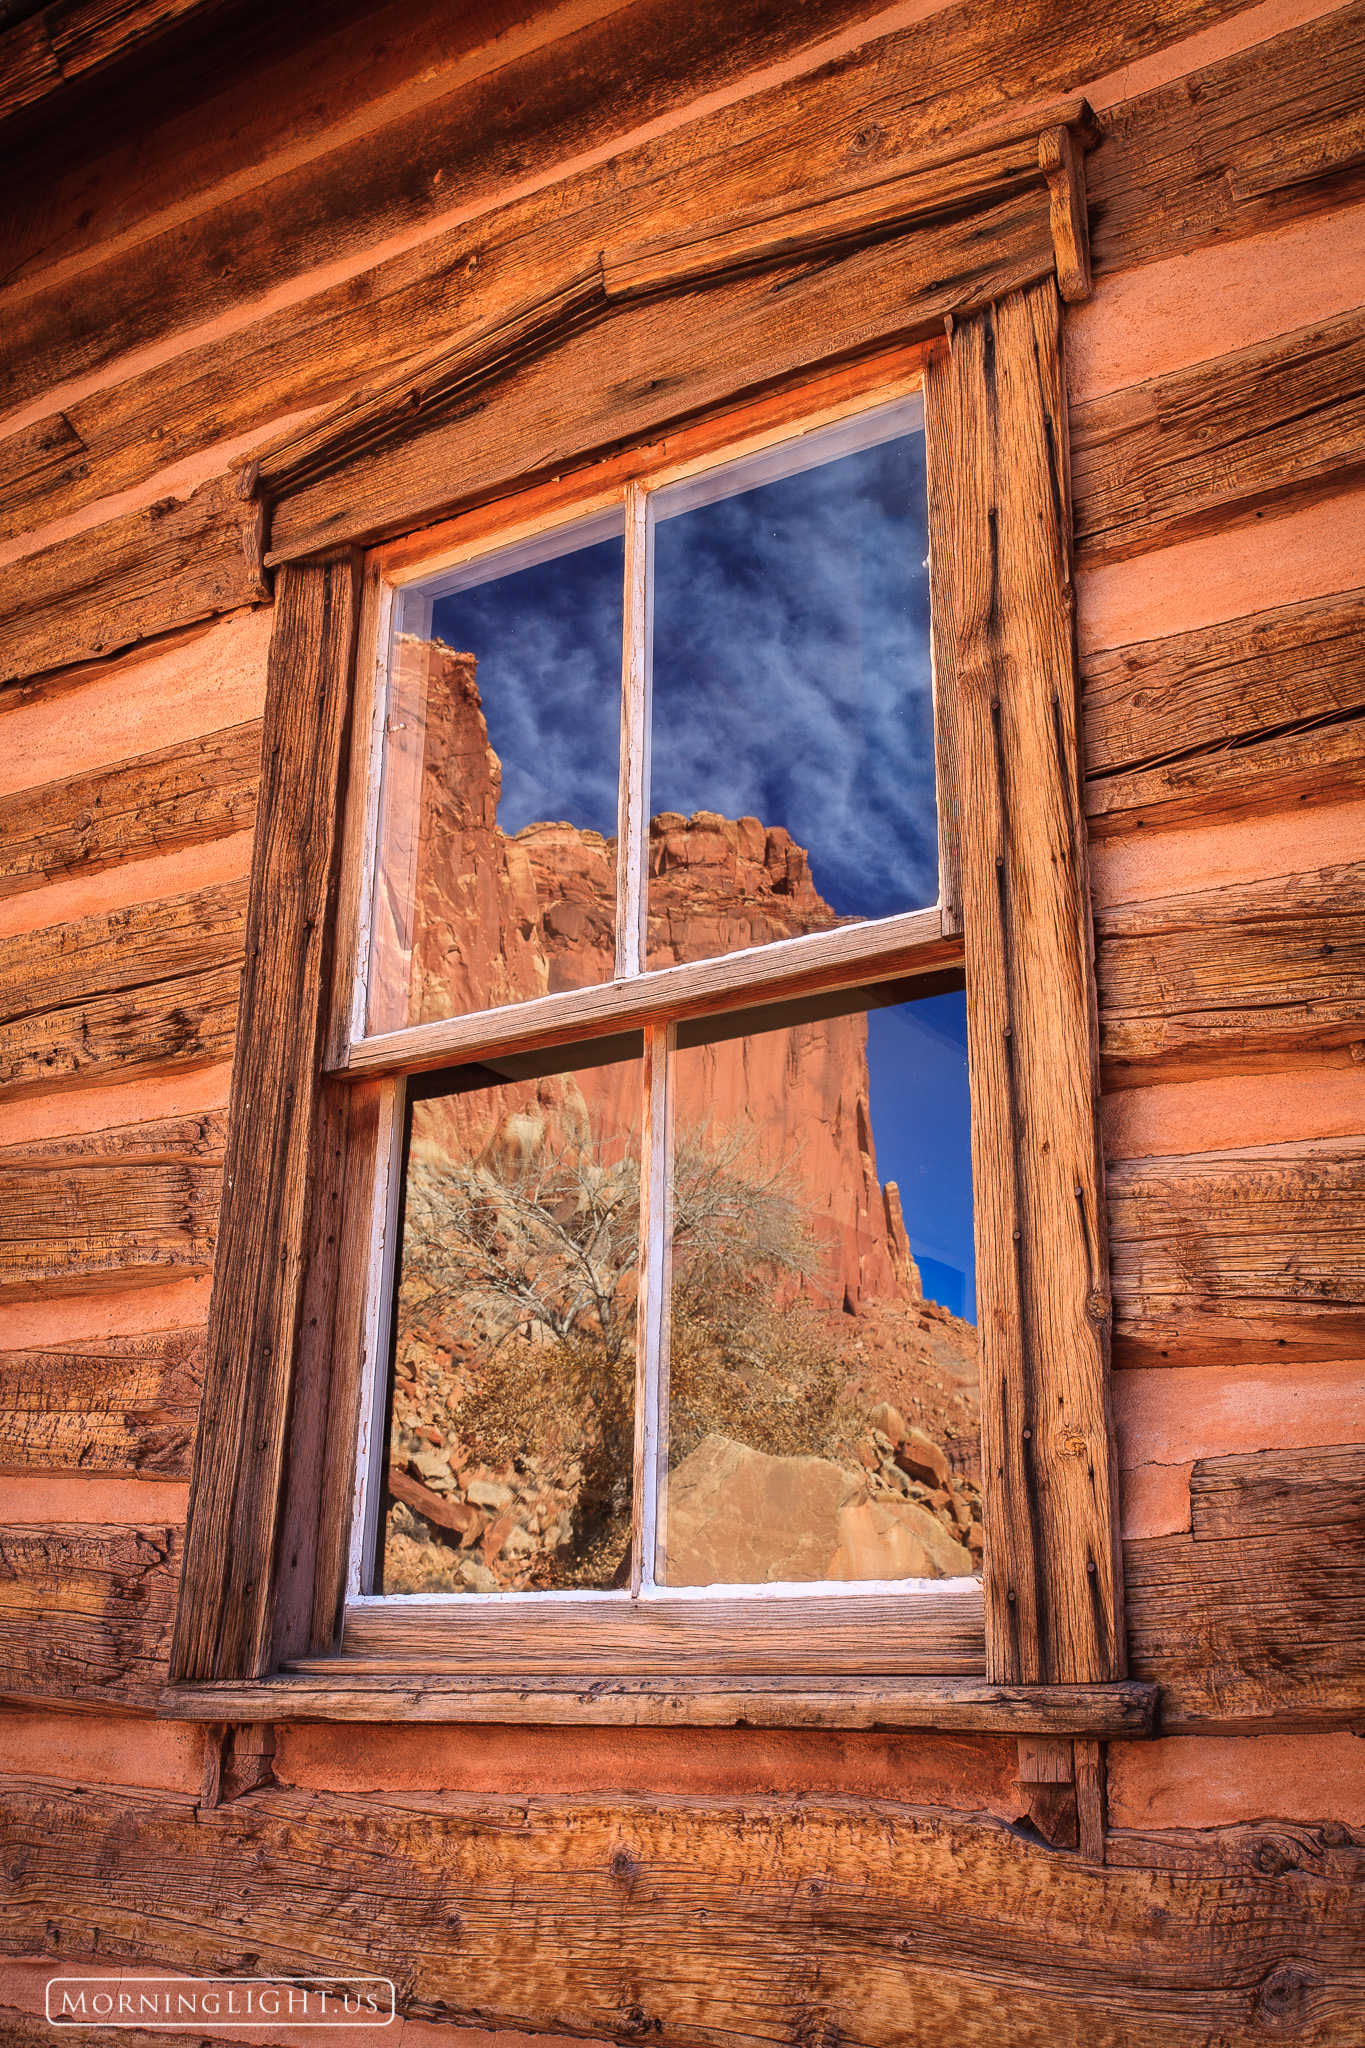 A large butte and clouds are reflected in the window of an old school along the road in Capitol Reef National Park in Utah.